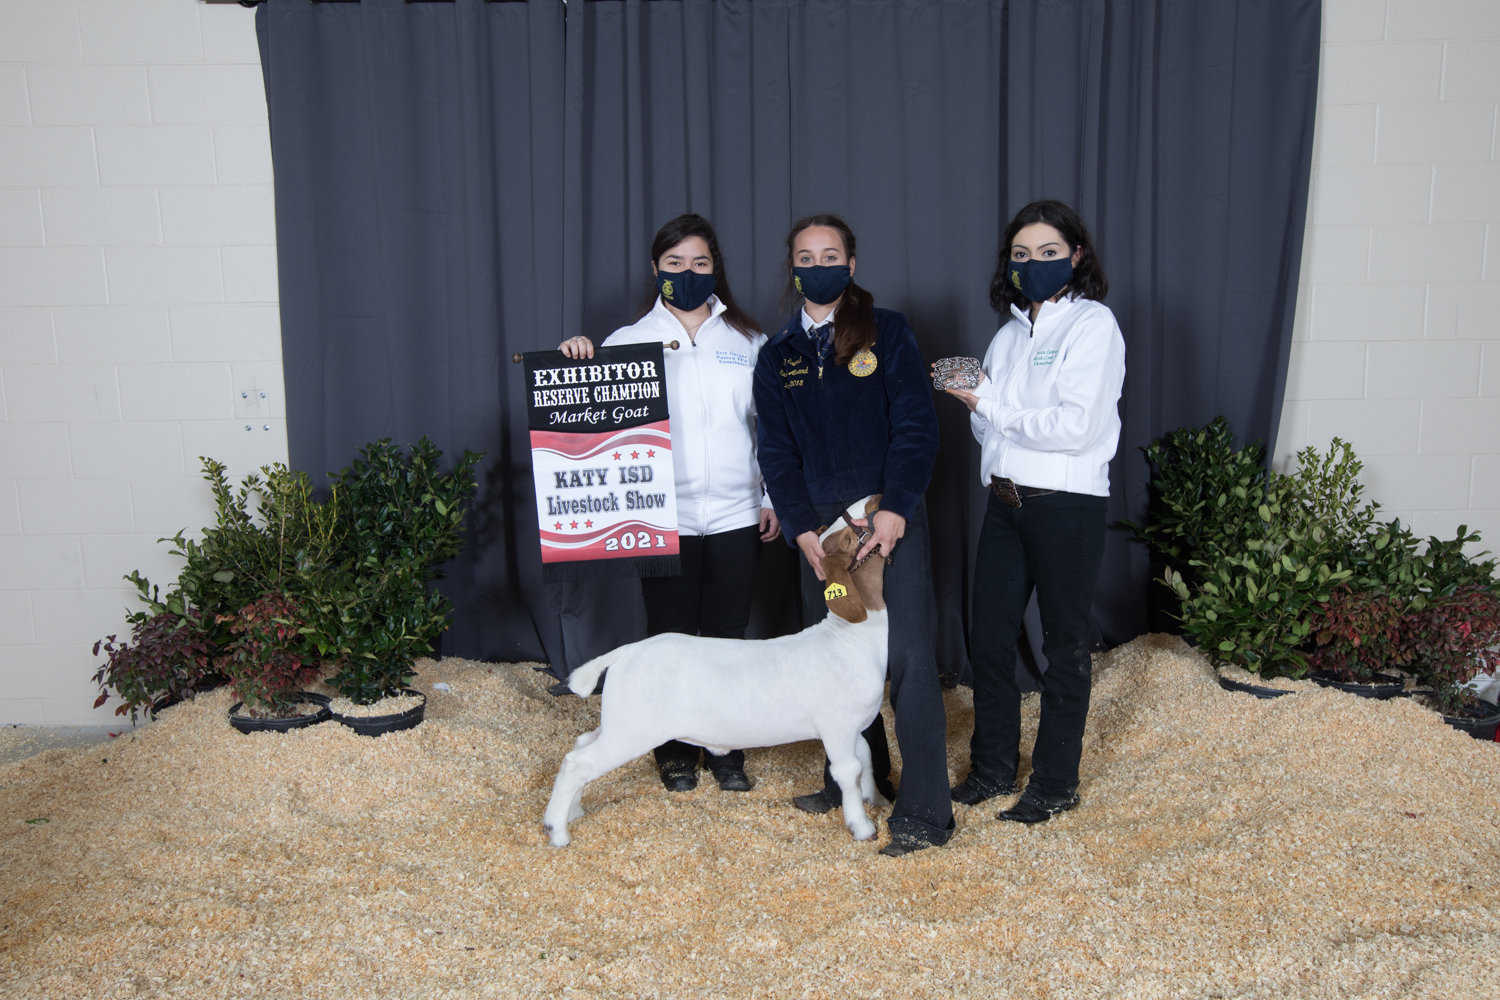 Cole Bearden of Paetow High School took the grand champion award for the goat competition this year with his $6,500 animal. He was followed by Erin Sword (above) of Katy High took reserve champion with her $5,000 project goat. In the showman competition, Tabitha Byrd of Paetow High School took the grand champion showman title with her $3,000 goat, followed by reserve champion showman Kaylee Binford of Katy High School’s $2,300 animal.